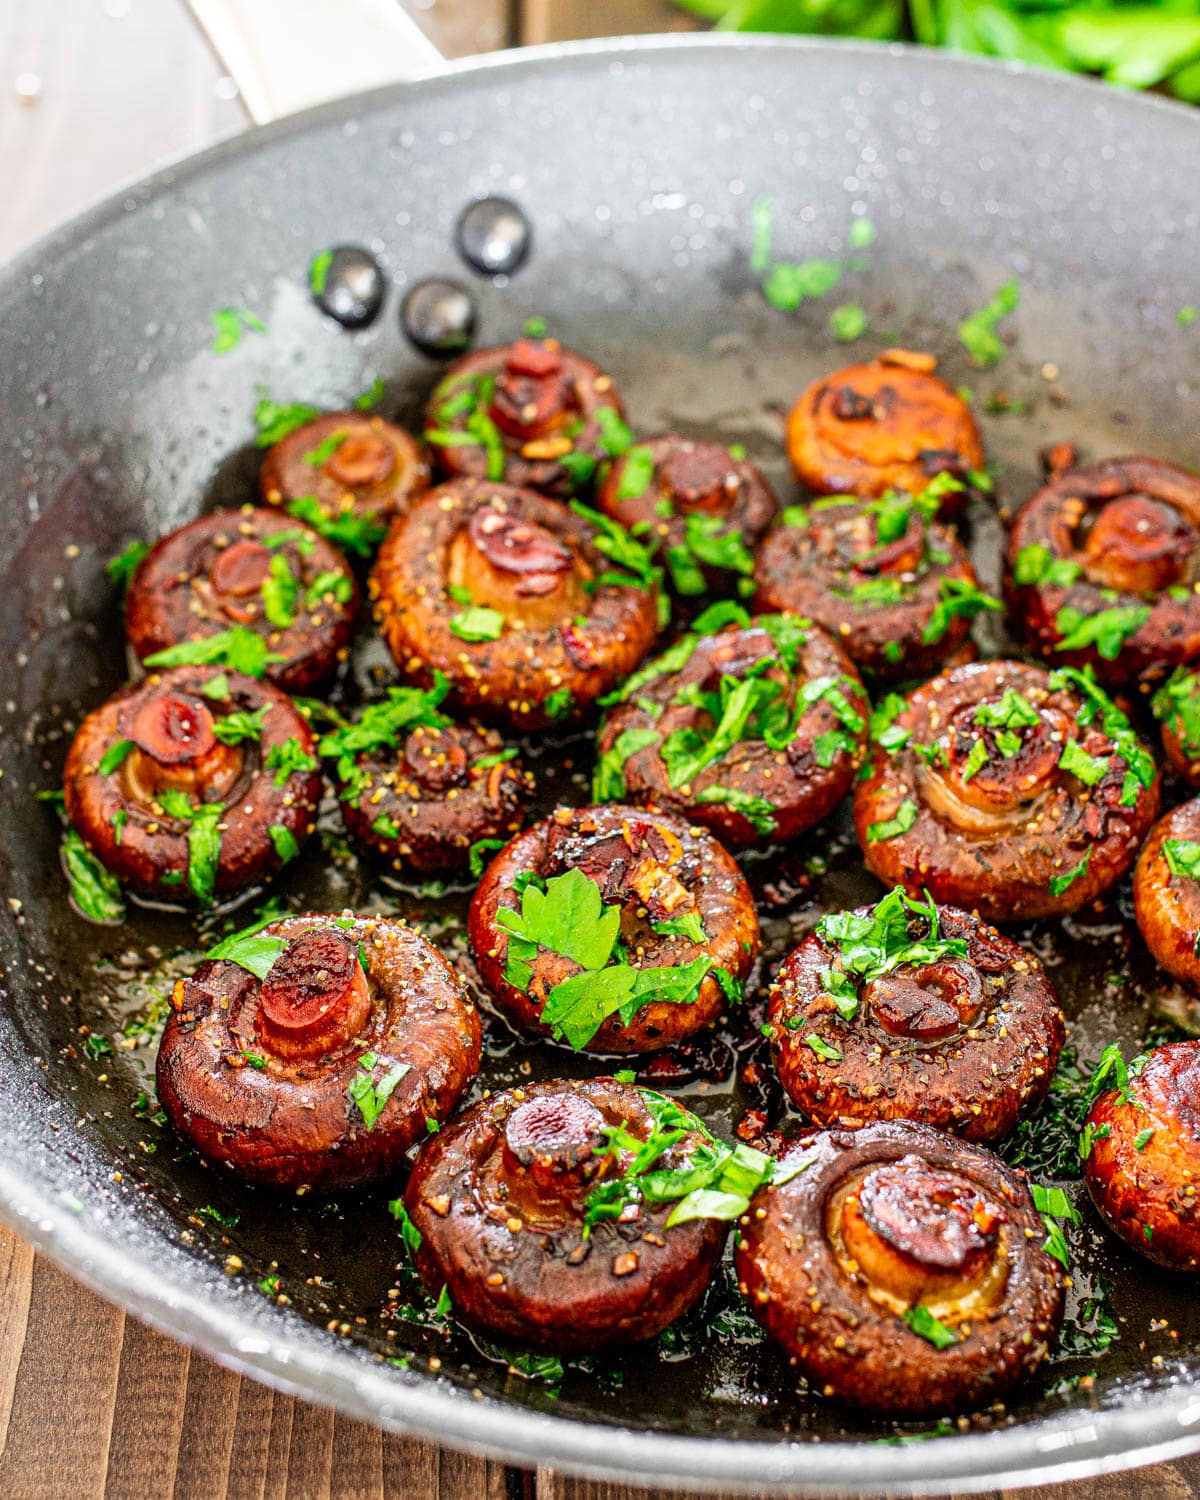 red wine mushrooms in a skillet garnished with parsley